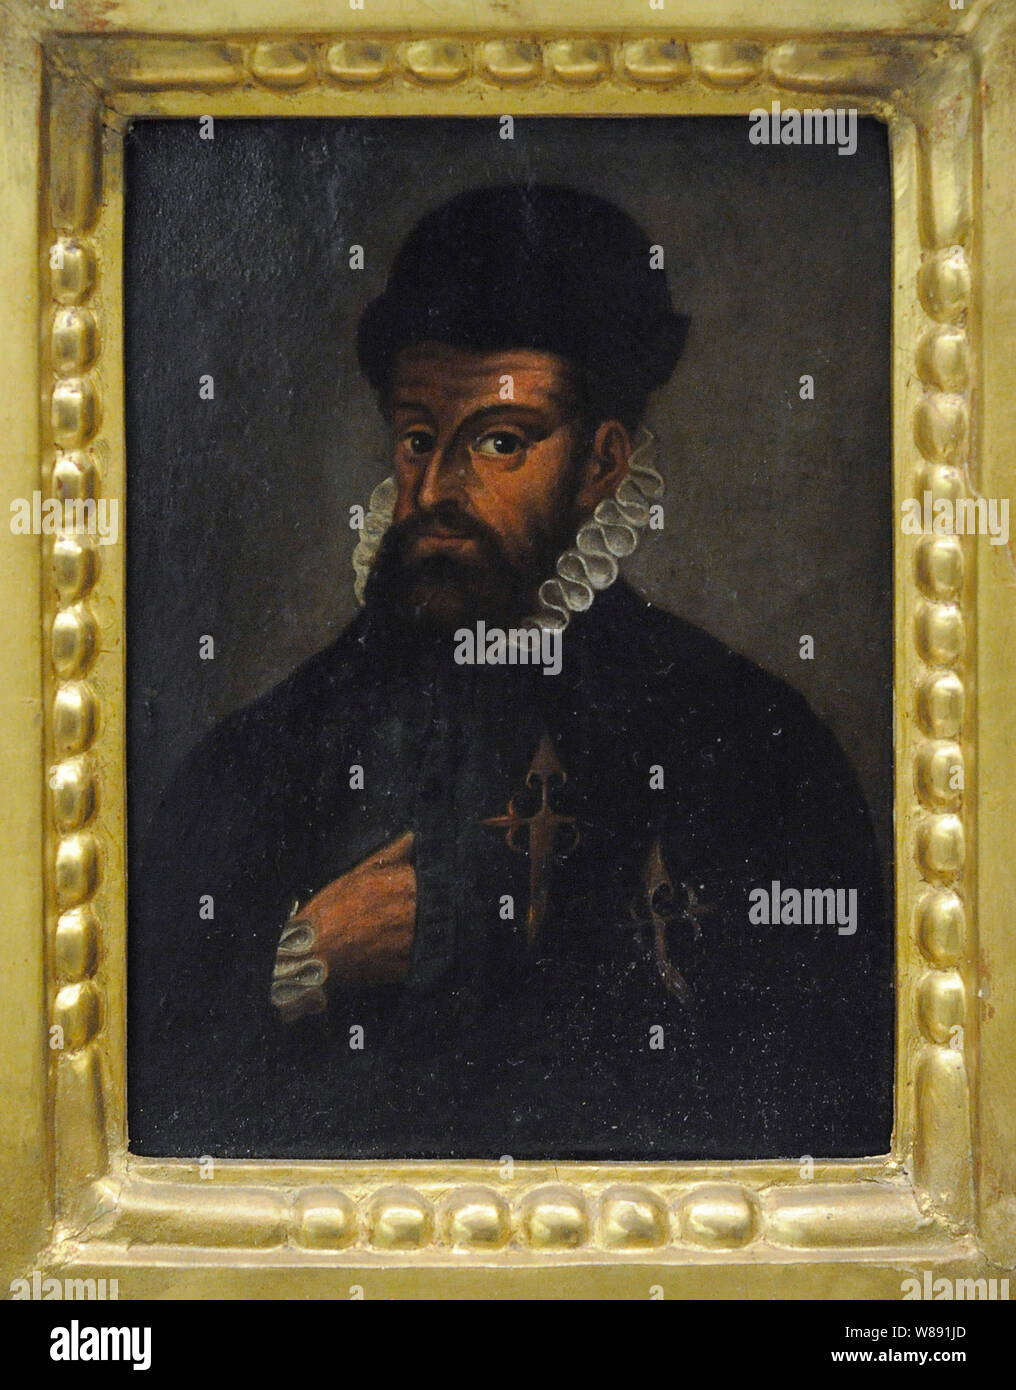 Francisco Pizarro (ca. 1476-1541). Spanish explorer and conquistador. After conquering Peru, founded its capital city, Lima. Anonymous portrait, Spain, 16th century. Oil on copper. Museum of the Americas. Madrid, Spain. Stock Photo